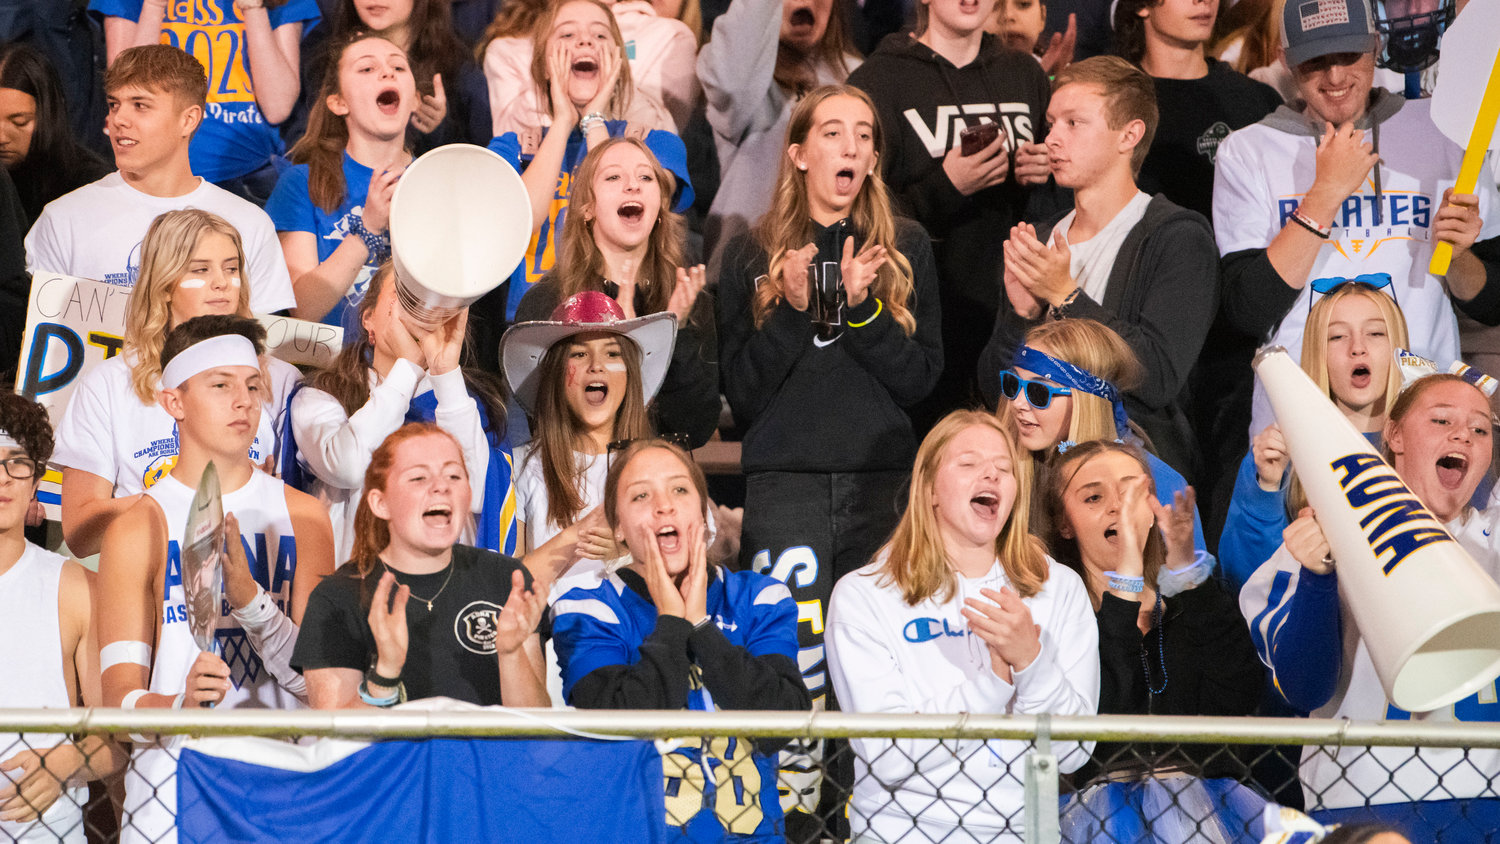 Pirate fans cheer for athletes on homecoming night in Adna.